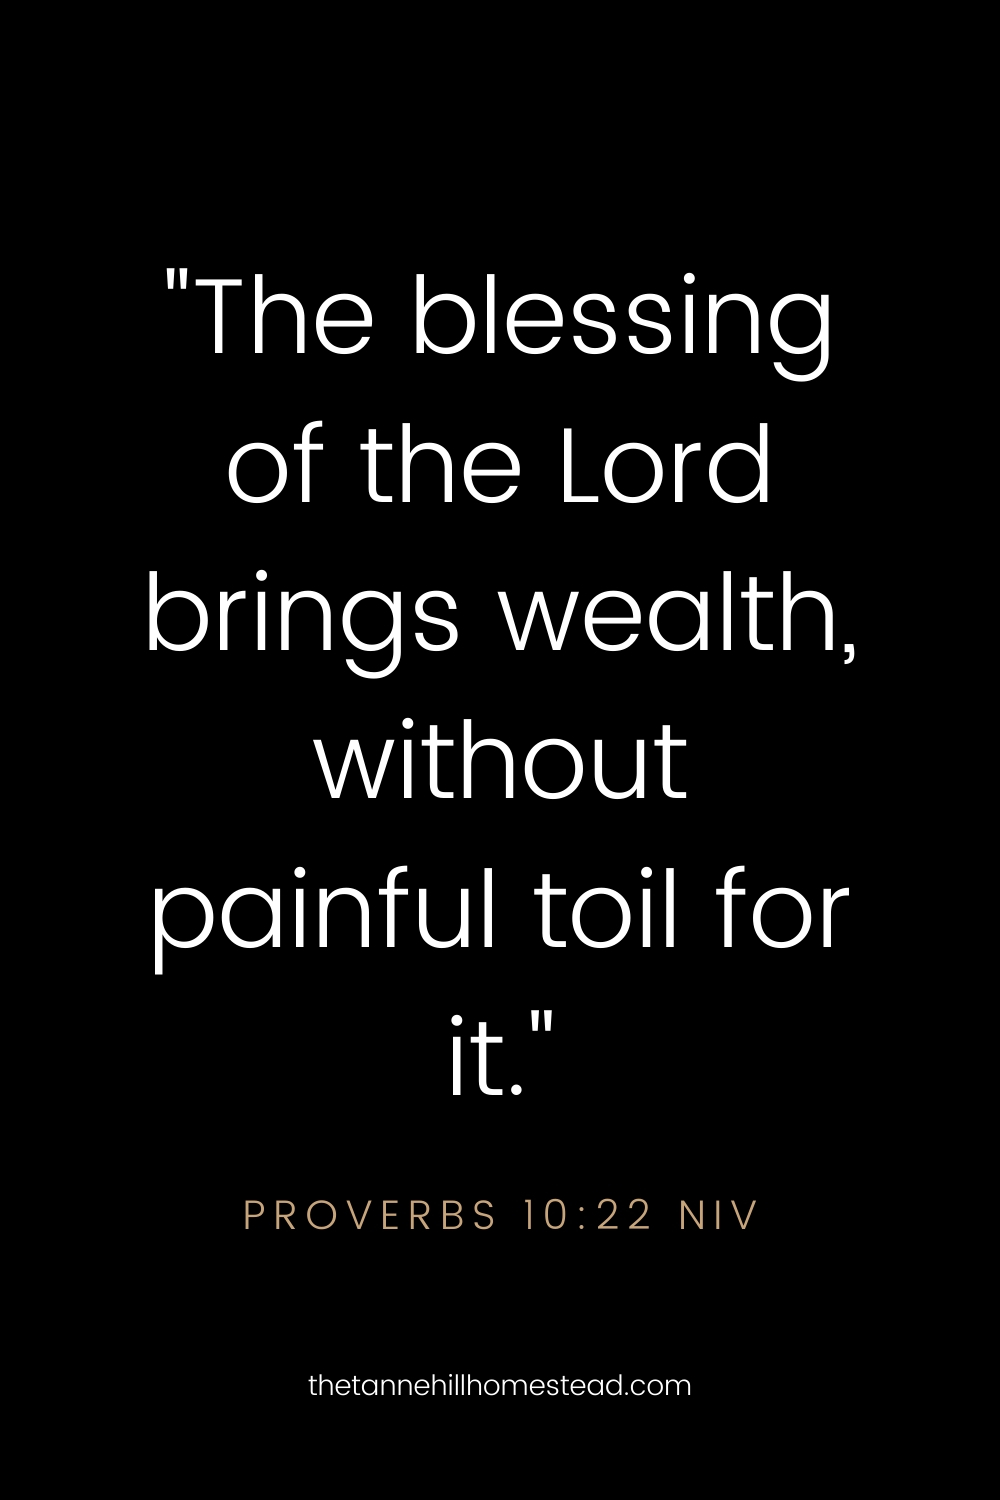 Proverbs 10:22 - Bible verses about contentment